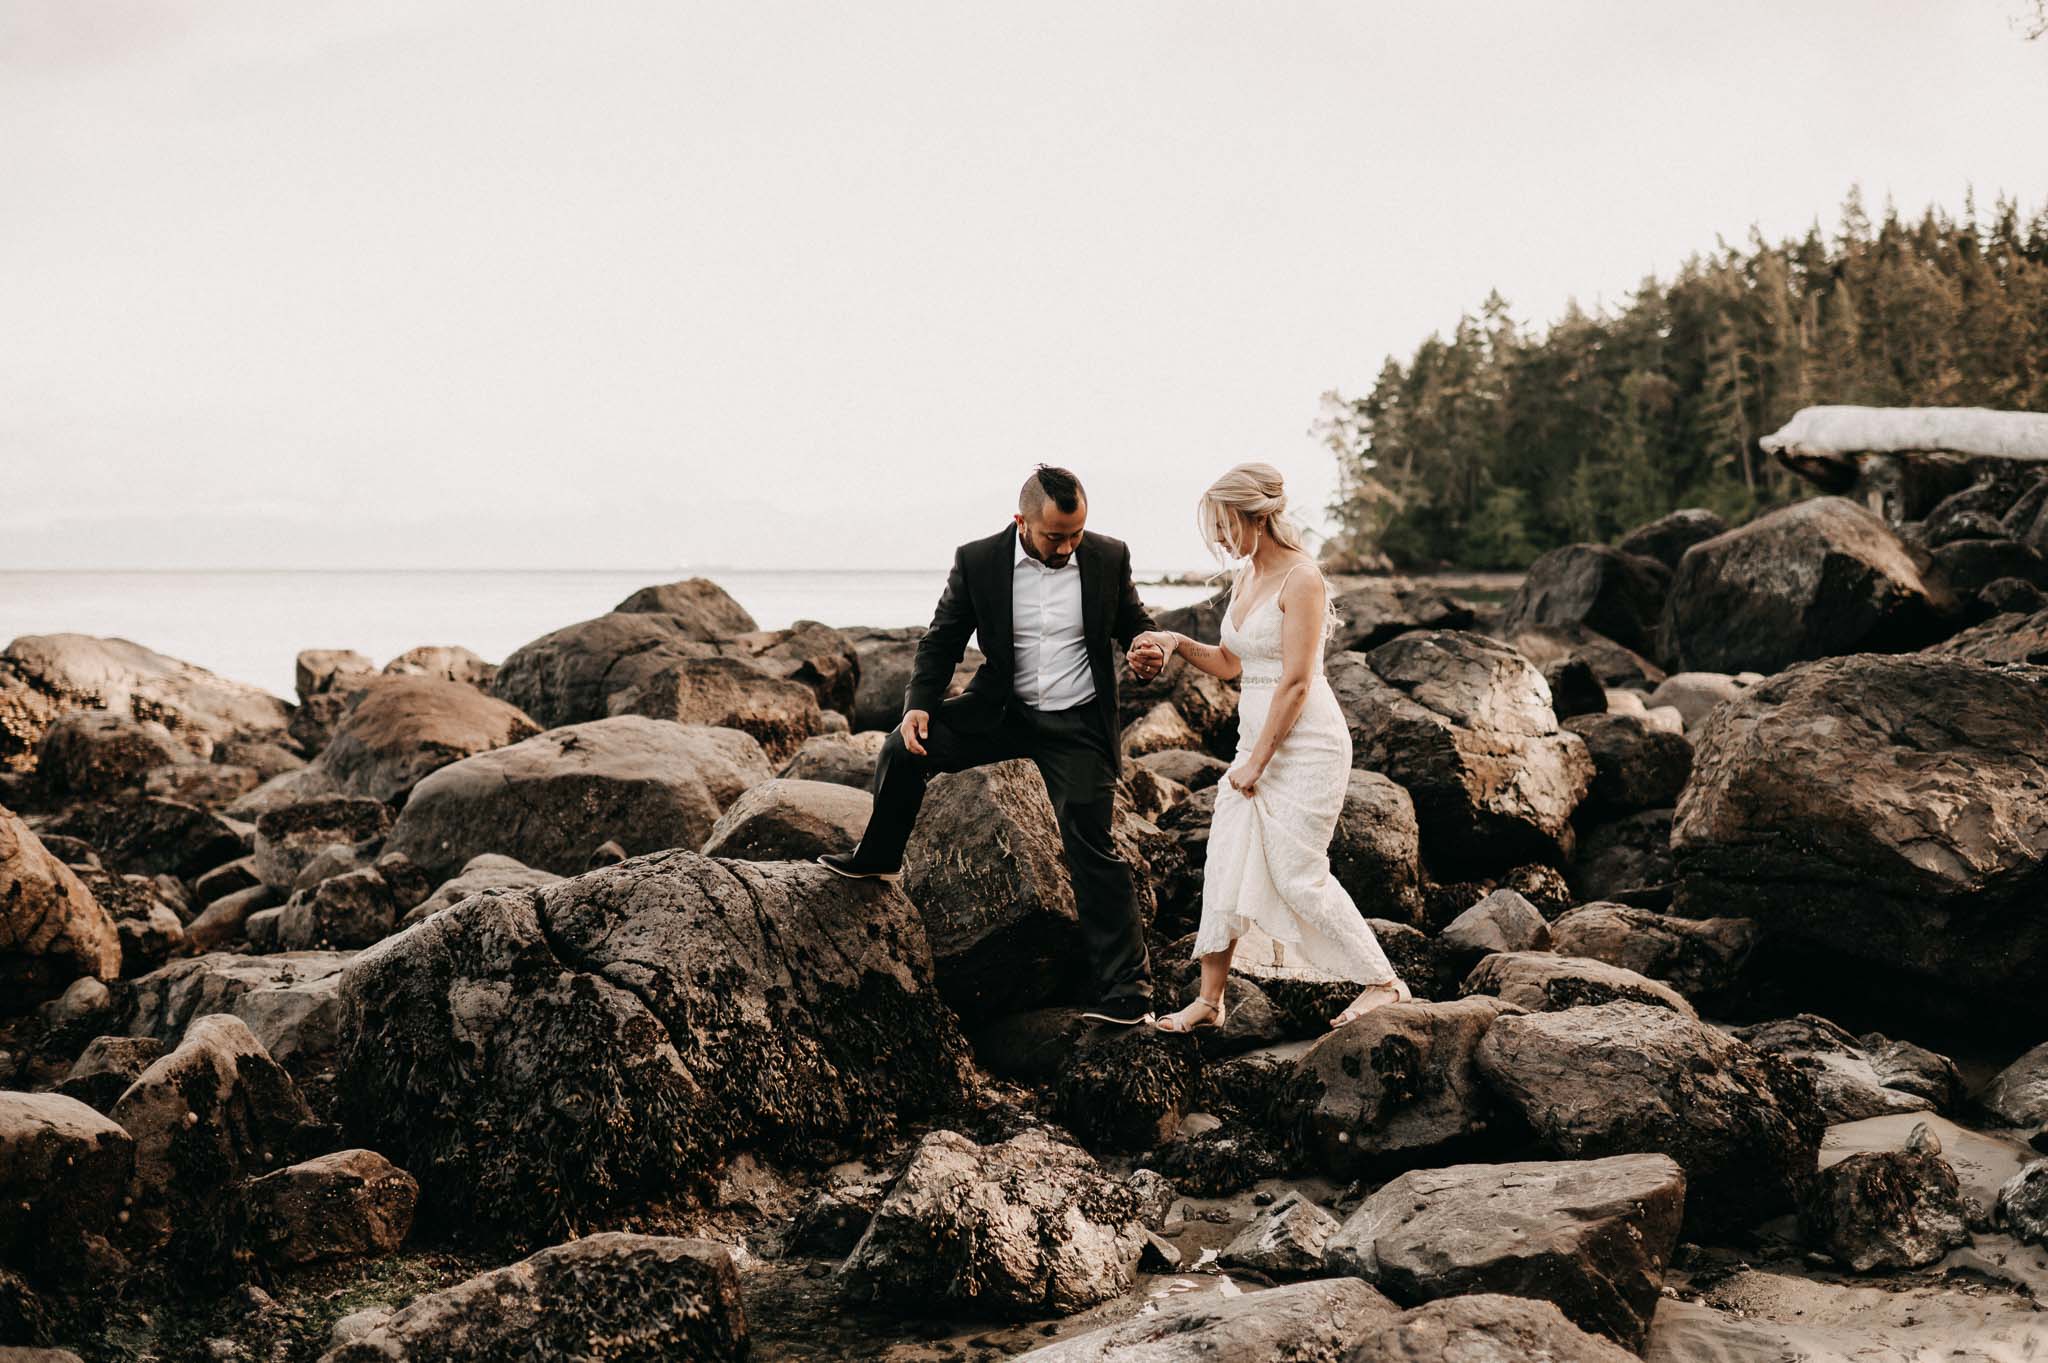 Wedding Photographer Victoria BC Elopement Photography Experienced Photographers BC